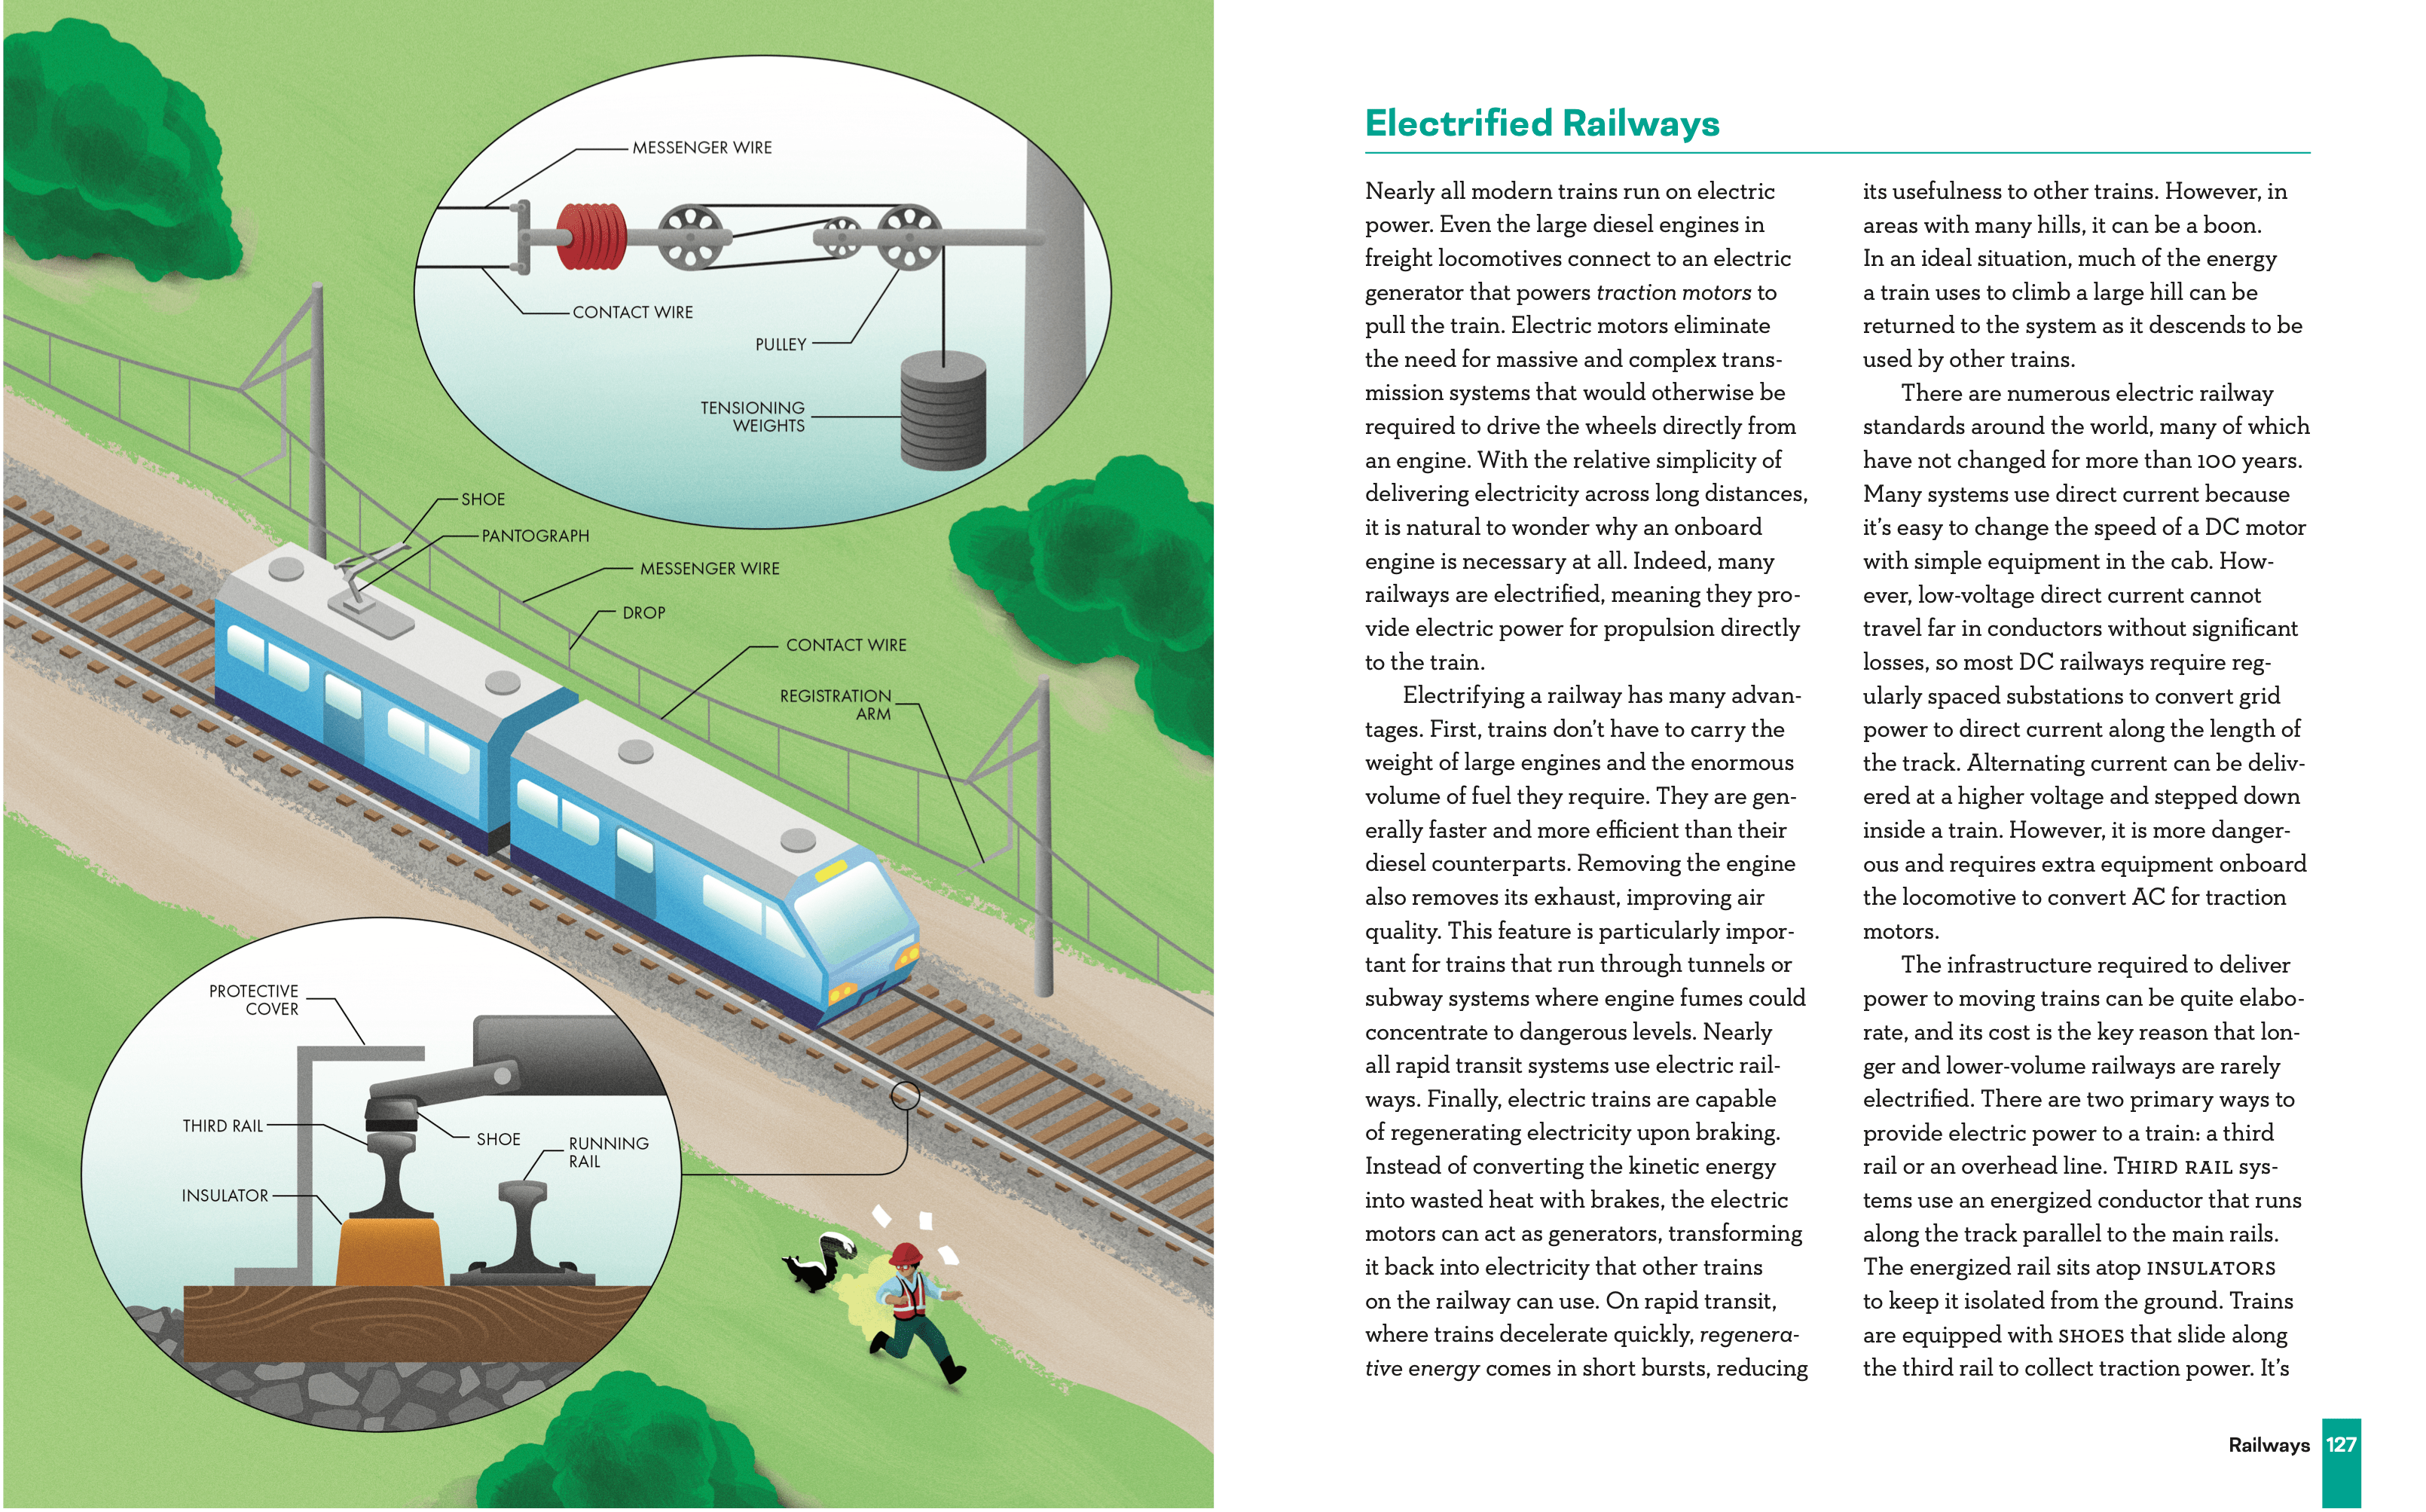 Engineering In Plain Sight pages 126-127